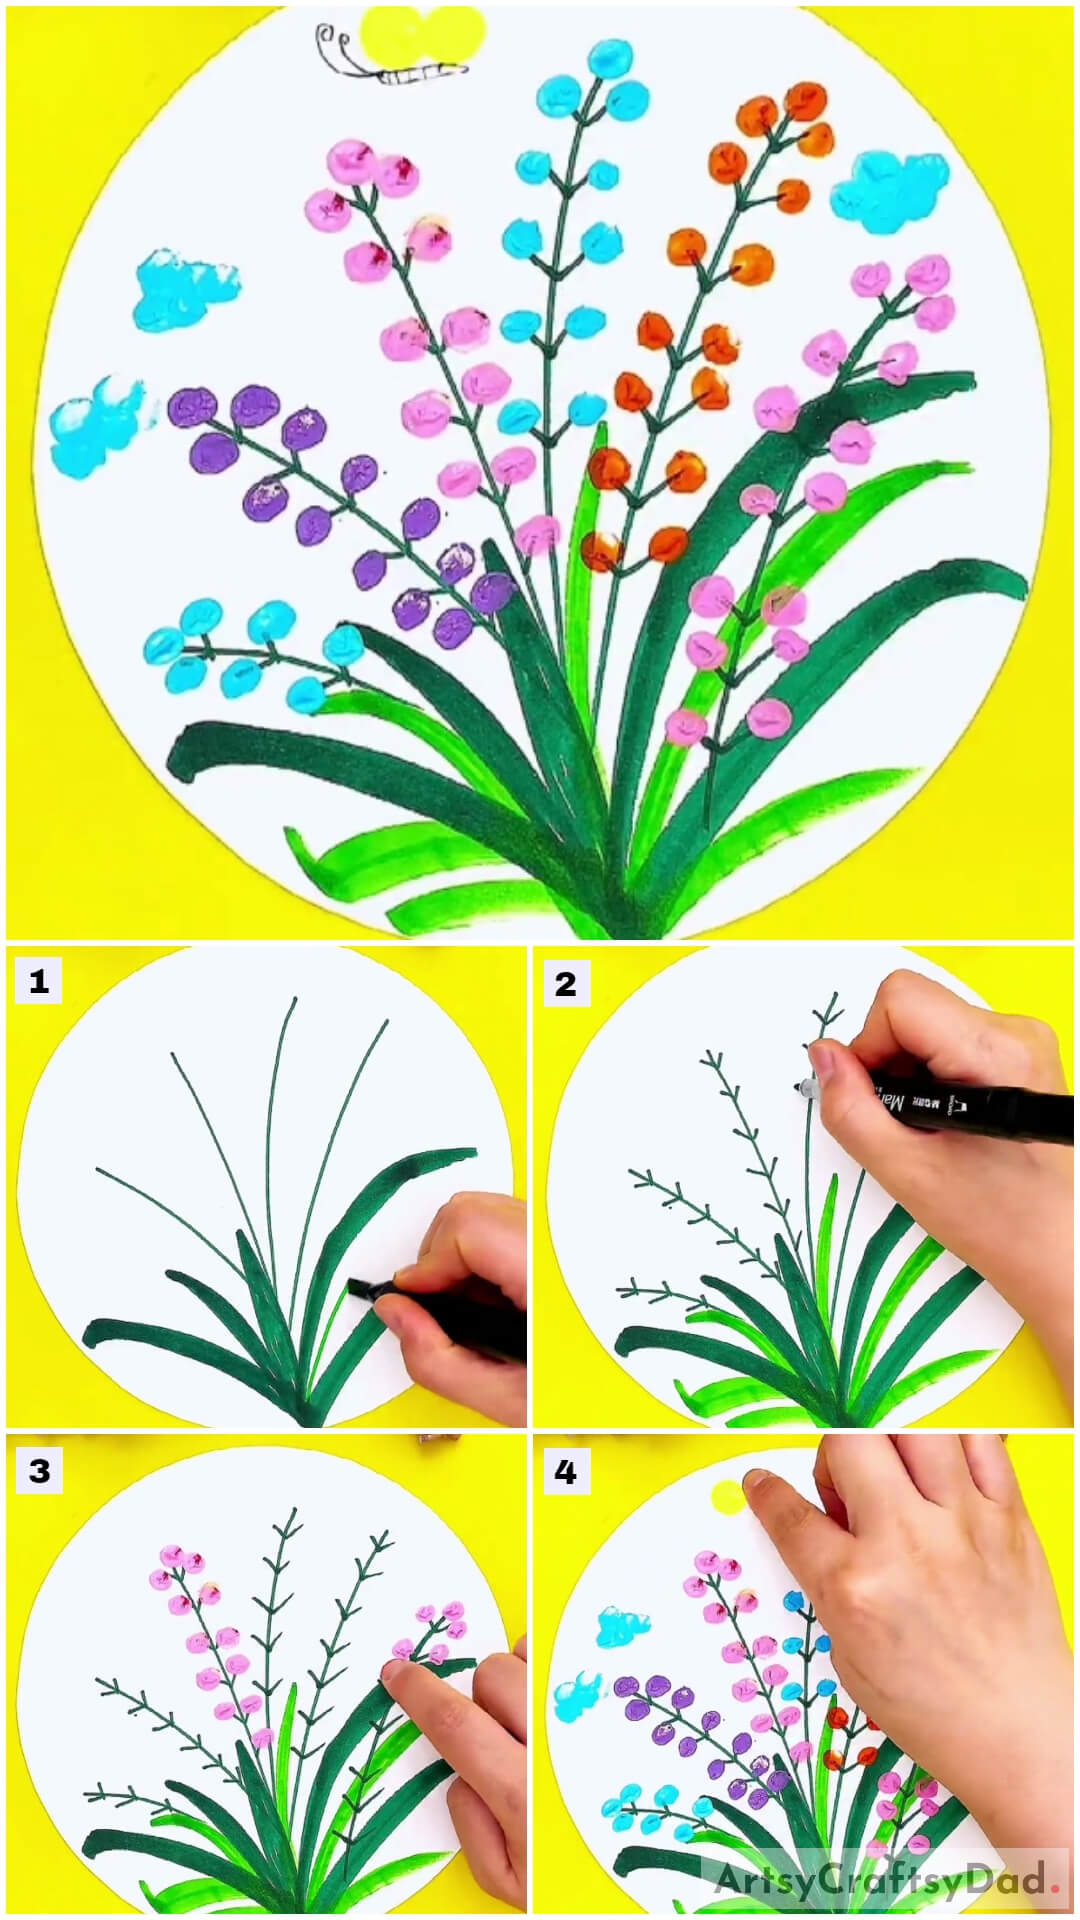 Colorful Flowers Drawing & Finger Painting Tutorial